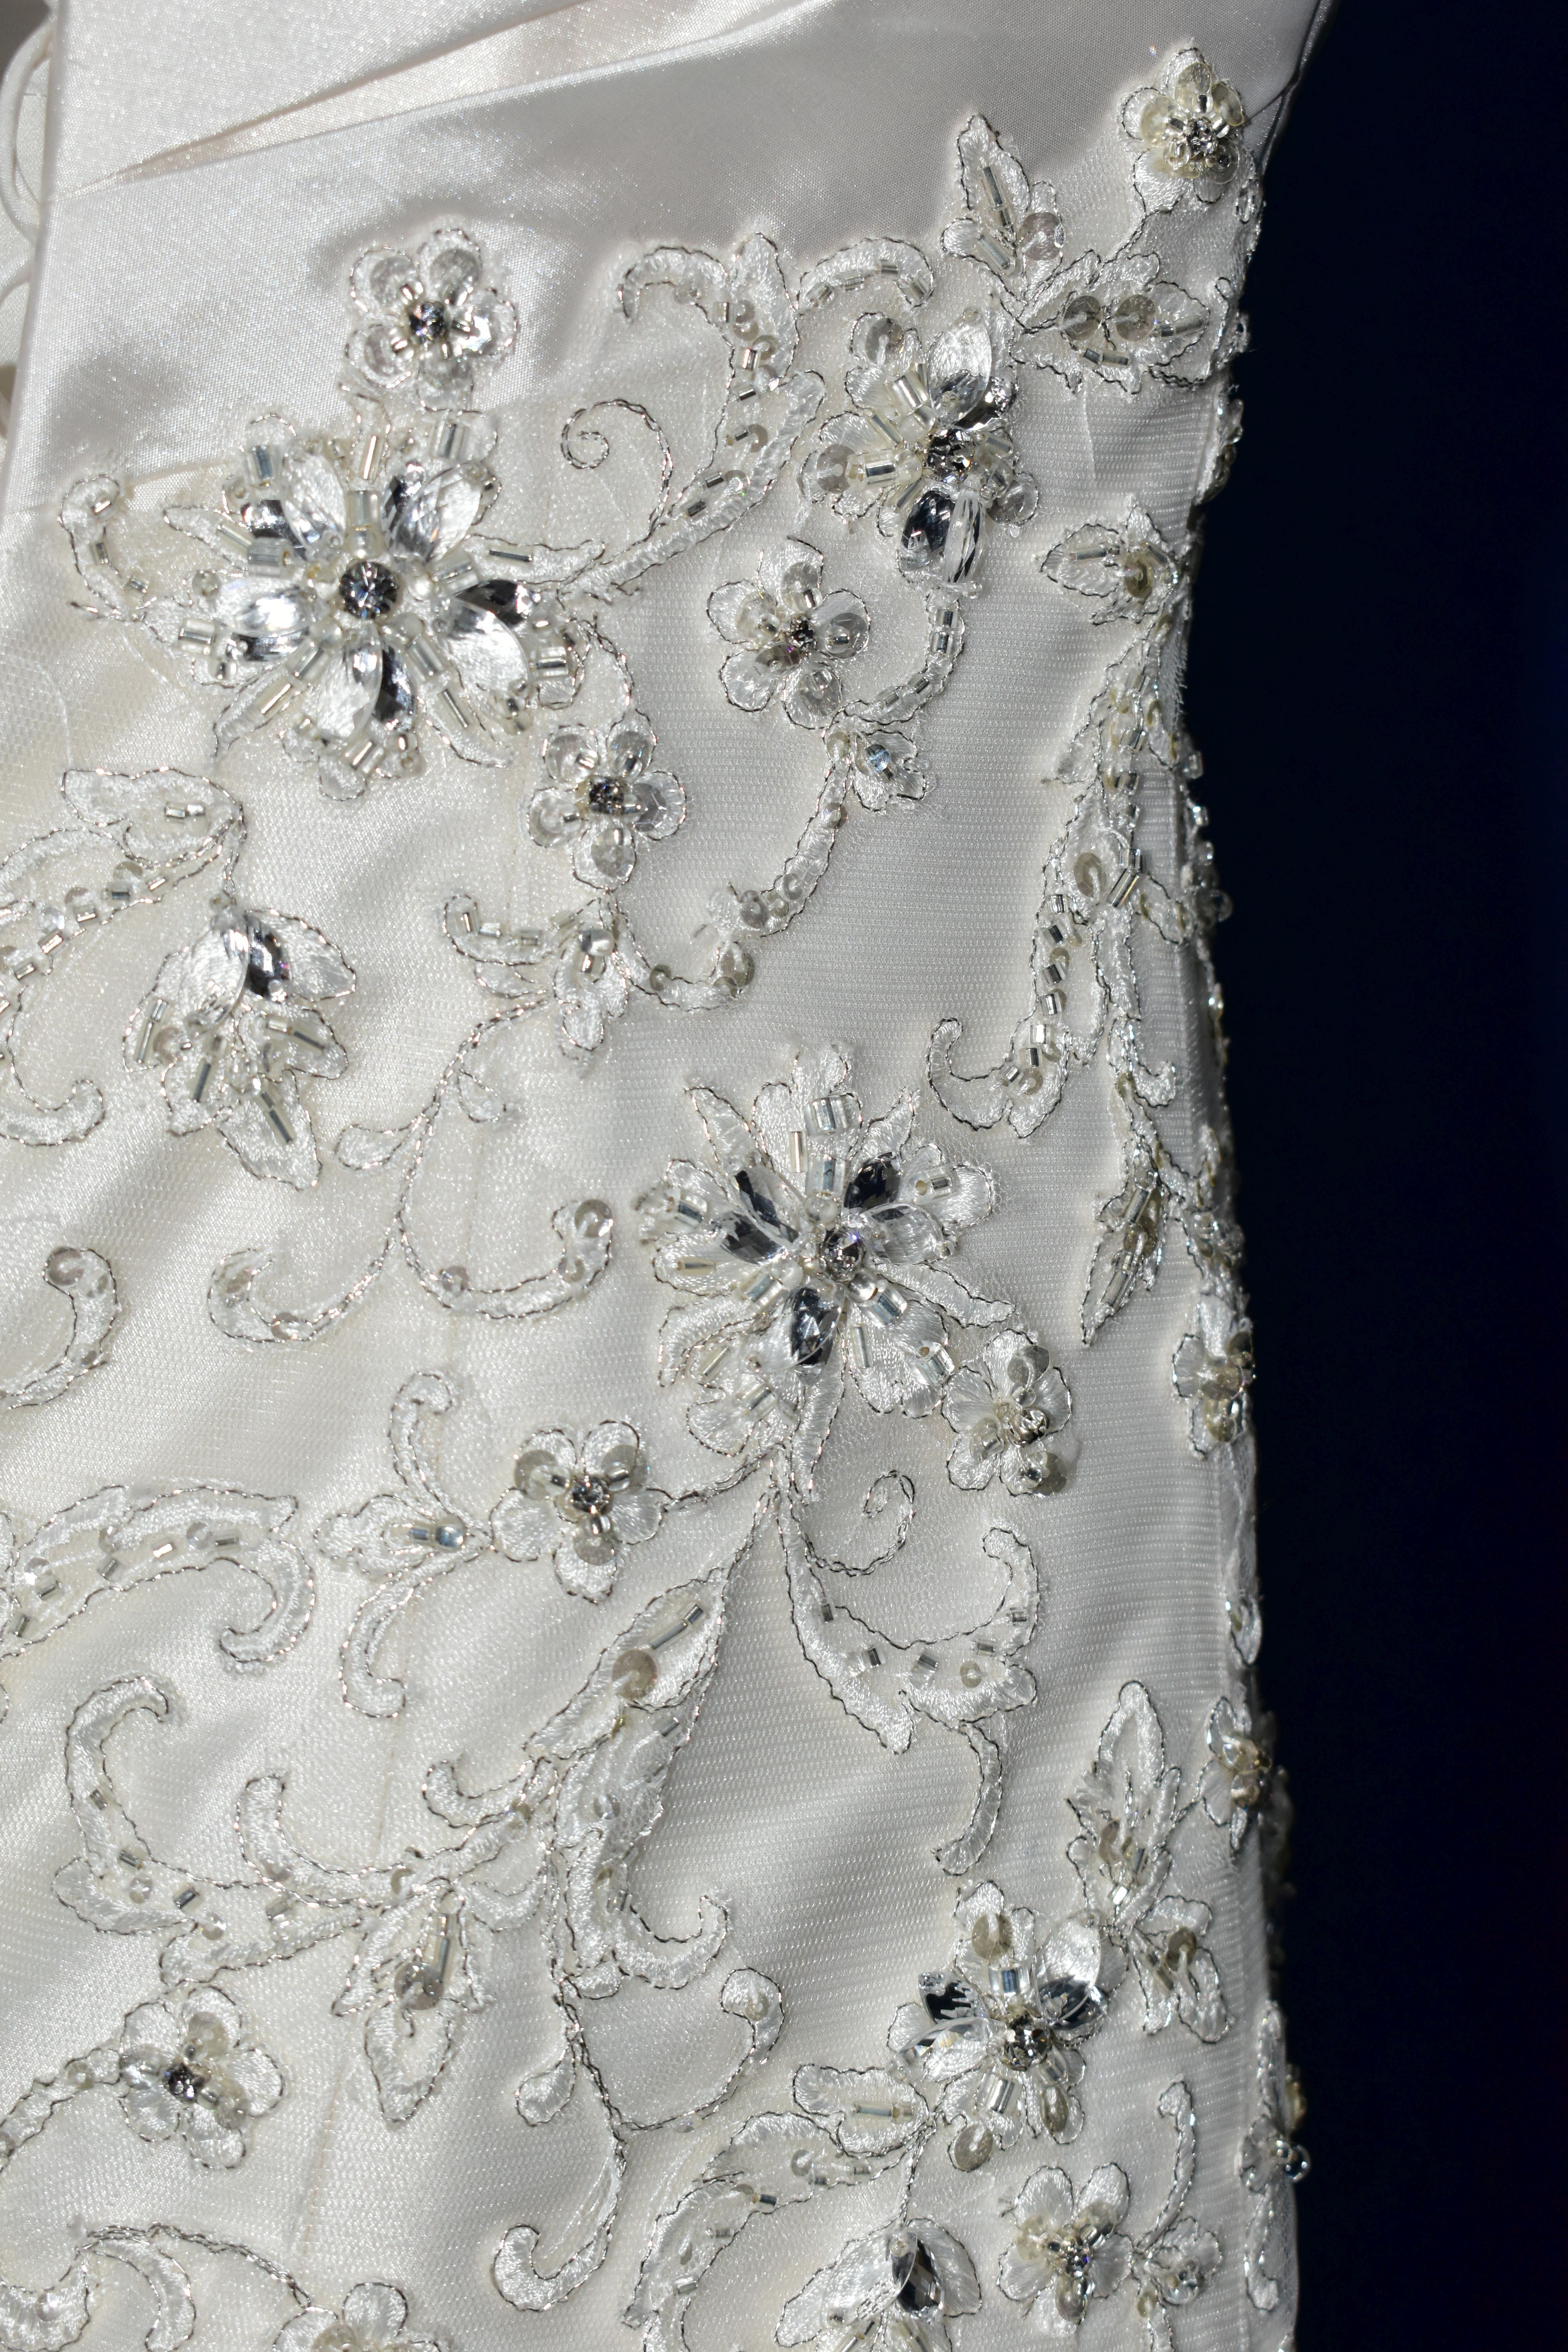 WEDDING GOWN, 'Sophia Tolli', size 10, champagne with satin bodice, pewter beaded appliques (1) - Image 13 of 13